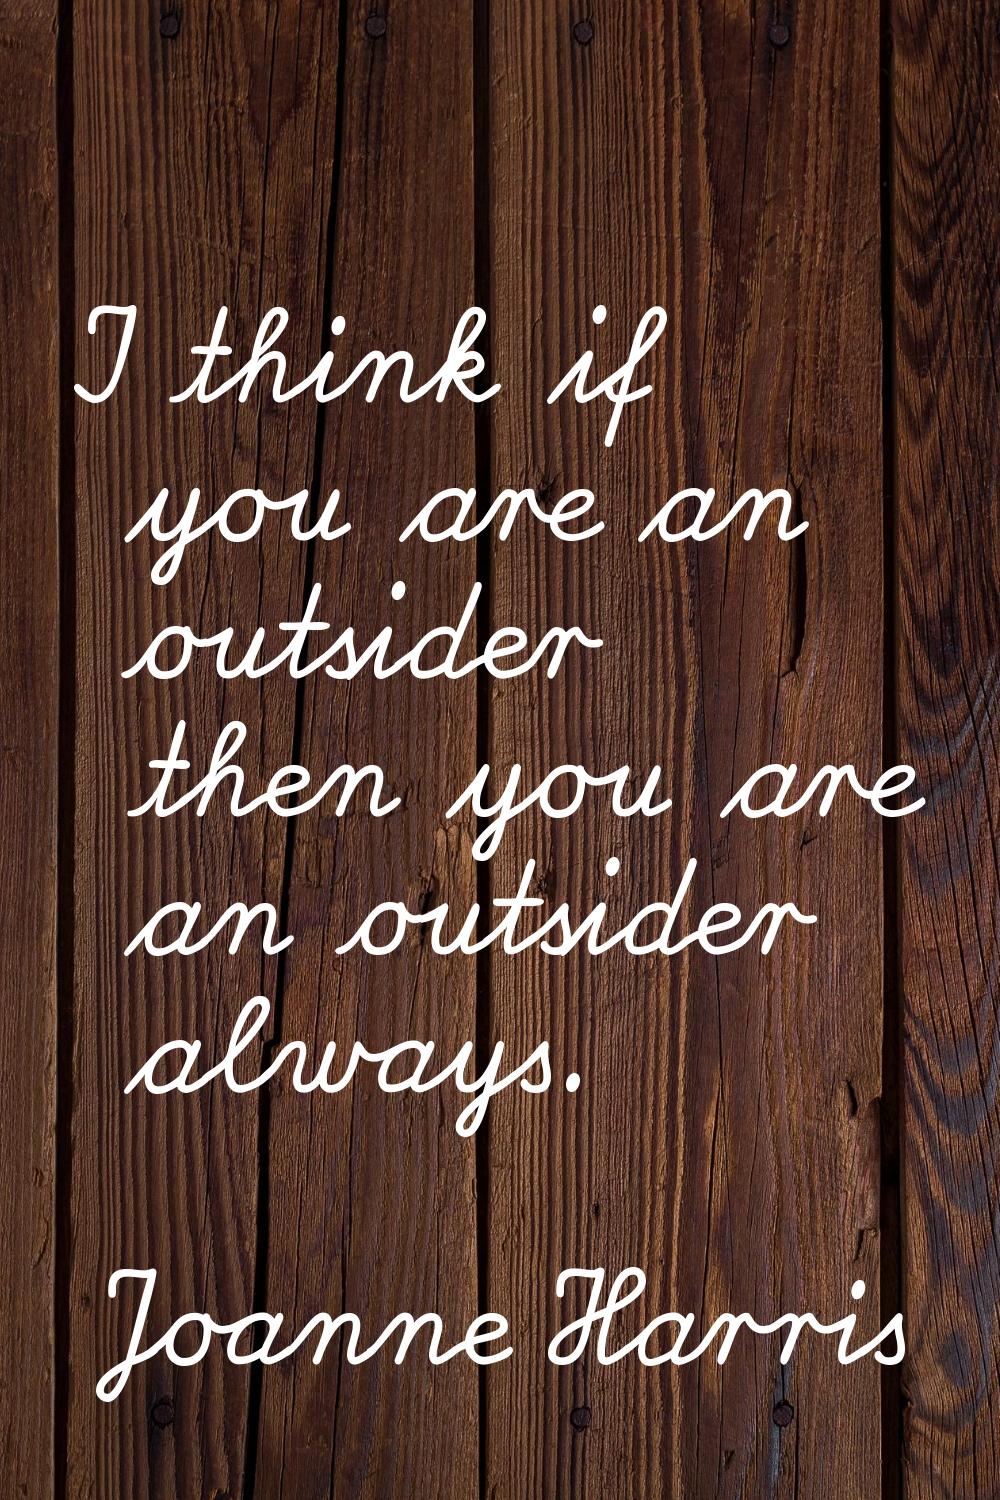 I think if you are an outsider then you are an outsider always.